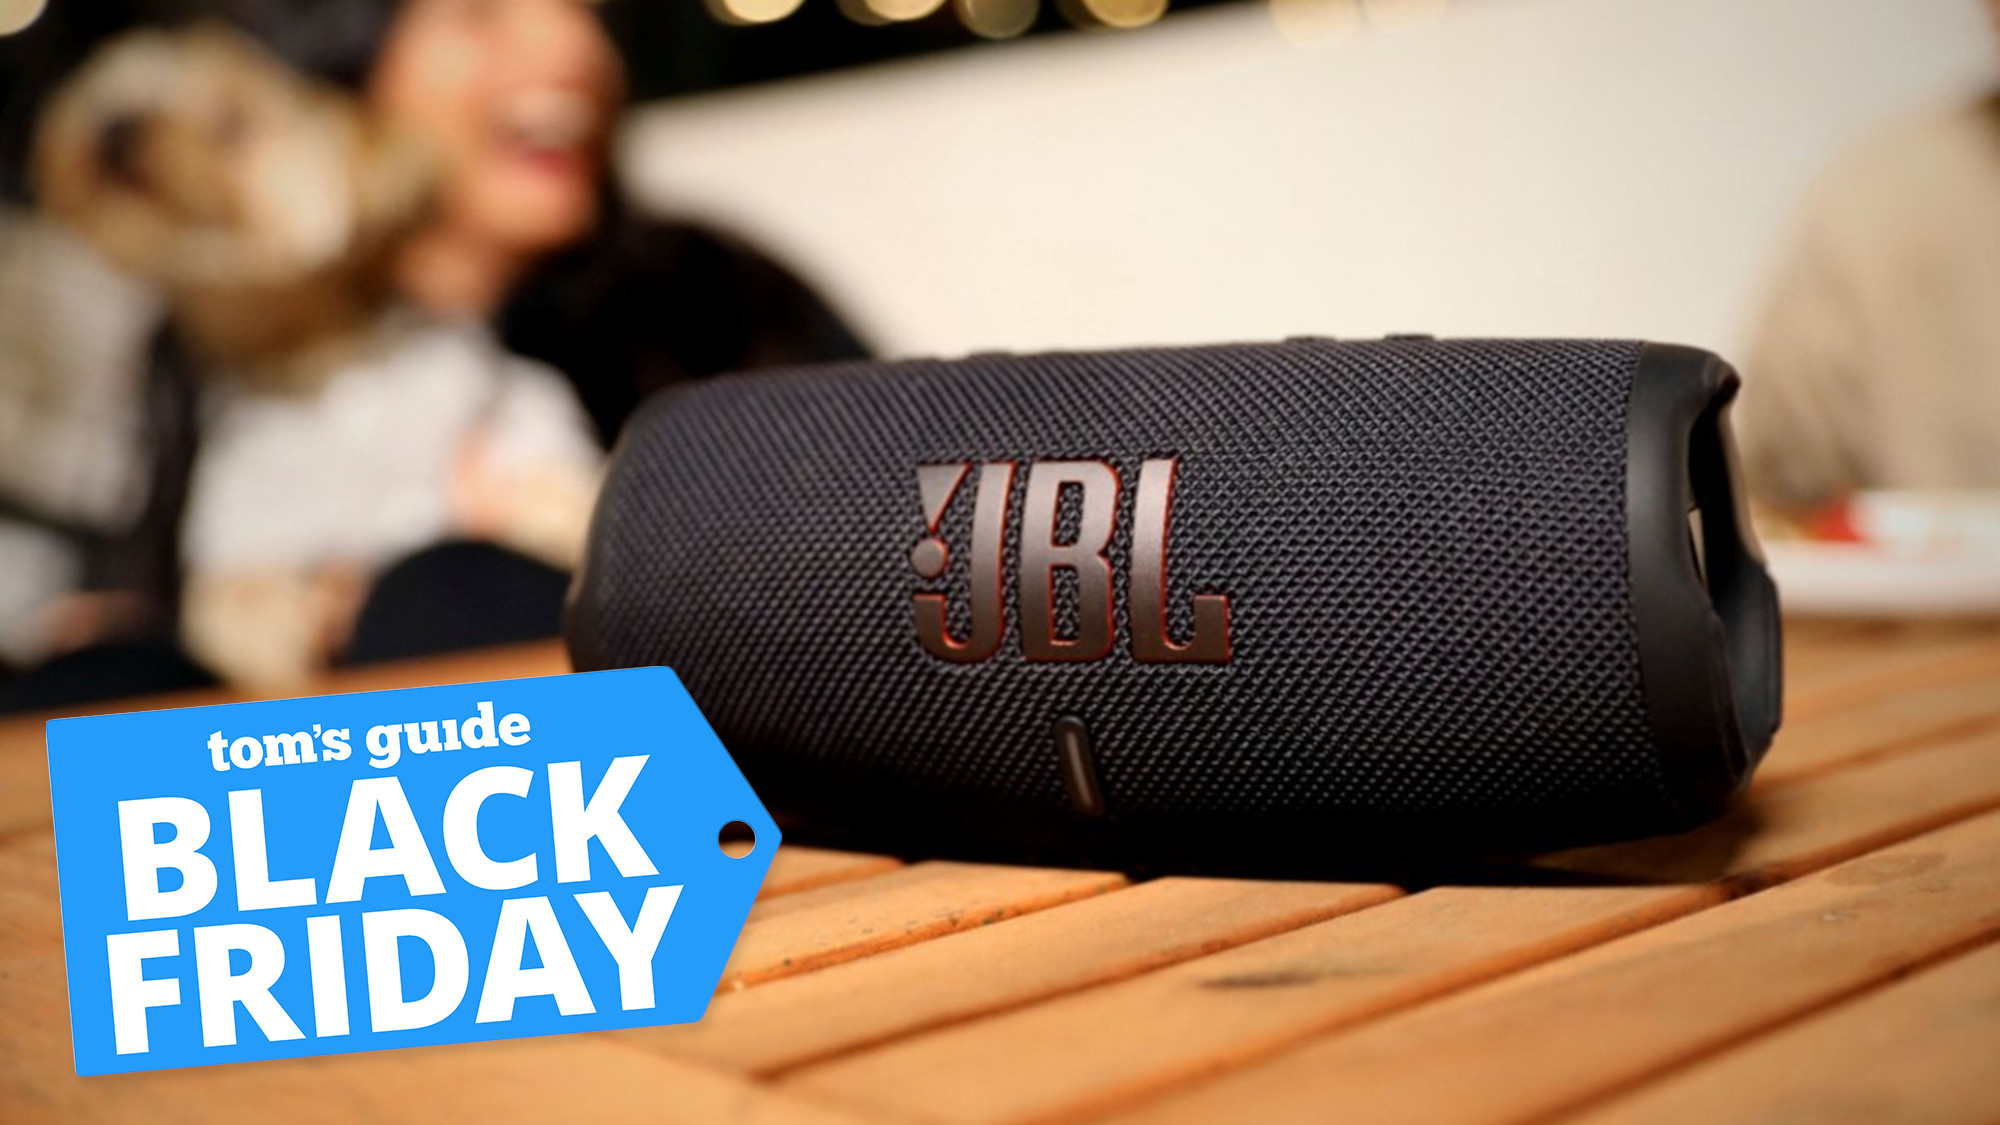 JBL's latest speakers now up to 38% off for Black Friday starting at $30